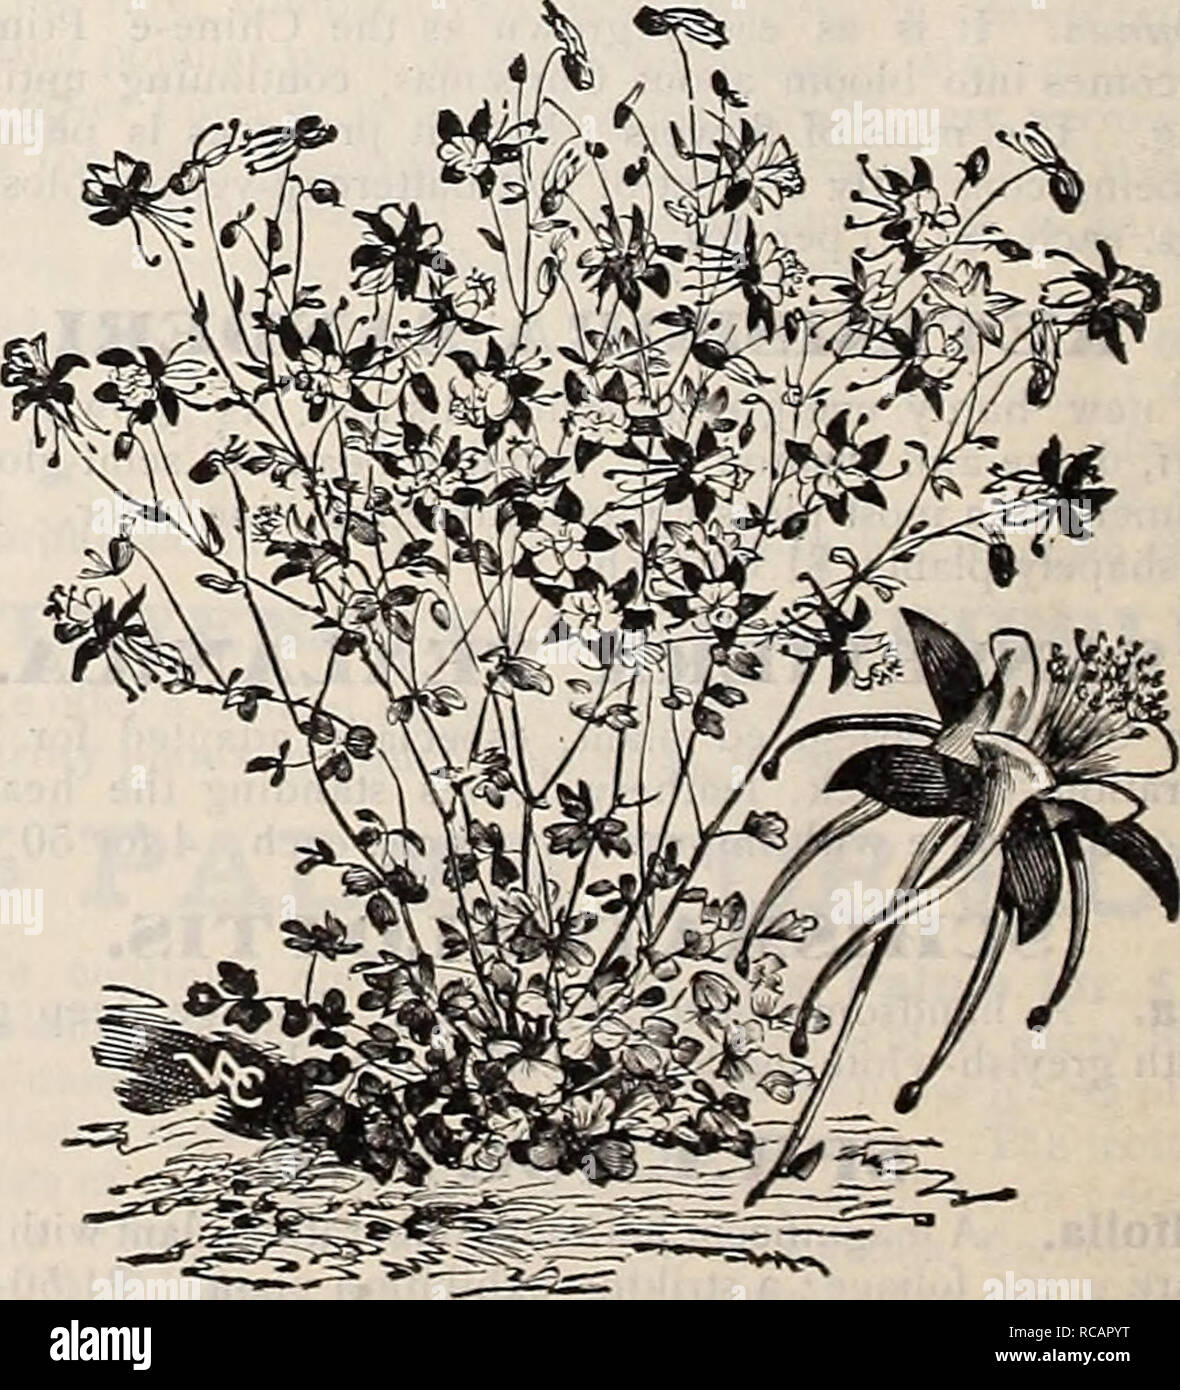 . Dreer's autumn catalogue 1906. Bulbs (Plants) Catalogs; Flowers Seeds Catalogs; Gardening Equipment and supplies Catalogs; Nurseries (Horticulture) Catalogs; Fruit Seeds Catalogs; Vegetables Seeds Catalogs. Aster Grandiflorus. A.chillea [BlUfoil or Tarroio). &quot; The Pearl.&quot; Pure white, flowers allsummeir; 2 fl. niipendiila {Noble Tai&quot;'ow. Large corymbs; golden yel- low ; July ; 2 ft. Millefolium Rosenxa '.Rofsy W!/oil). Rosy pink; blooms all summer; 18 inches. Eupatorium {Fern-leaved Yarrow). Brilliant yellow; 4 ft. Tomentosa (Woolly Yarrow). Golden yellow; June. Adonis Pyrenai Stock Photo